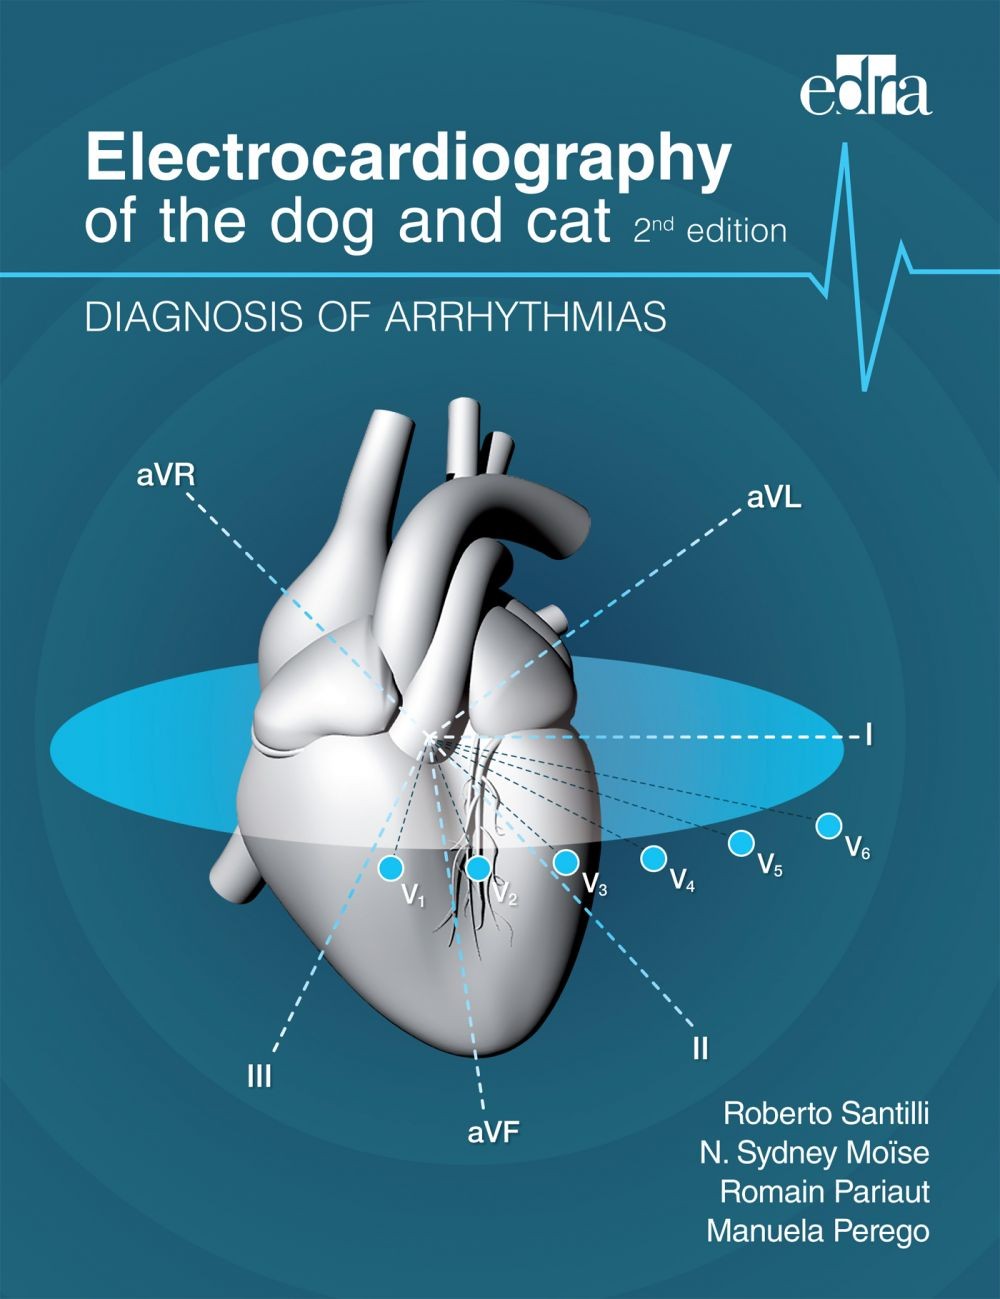 Electrocardiography of the dog and cat. 2nd edition - Librerie.coop